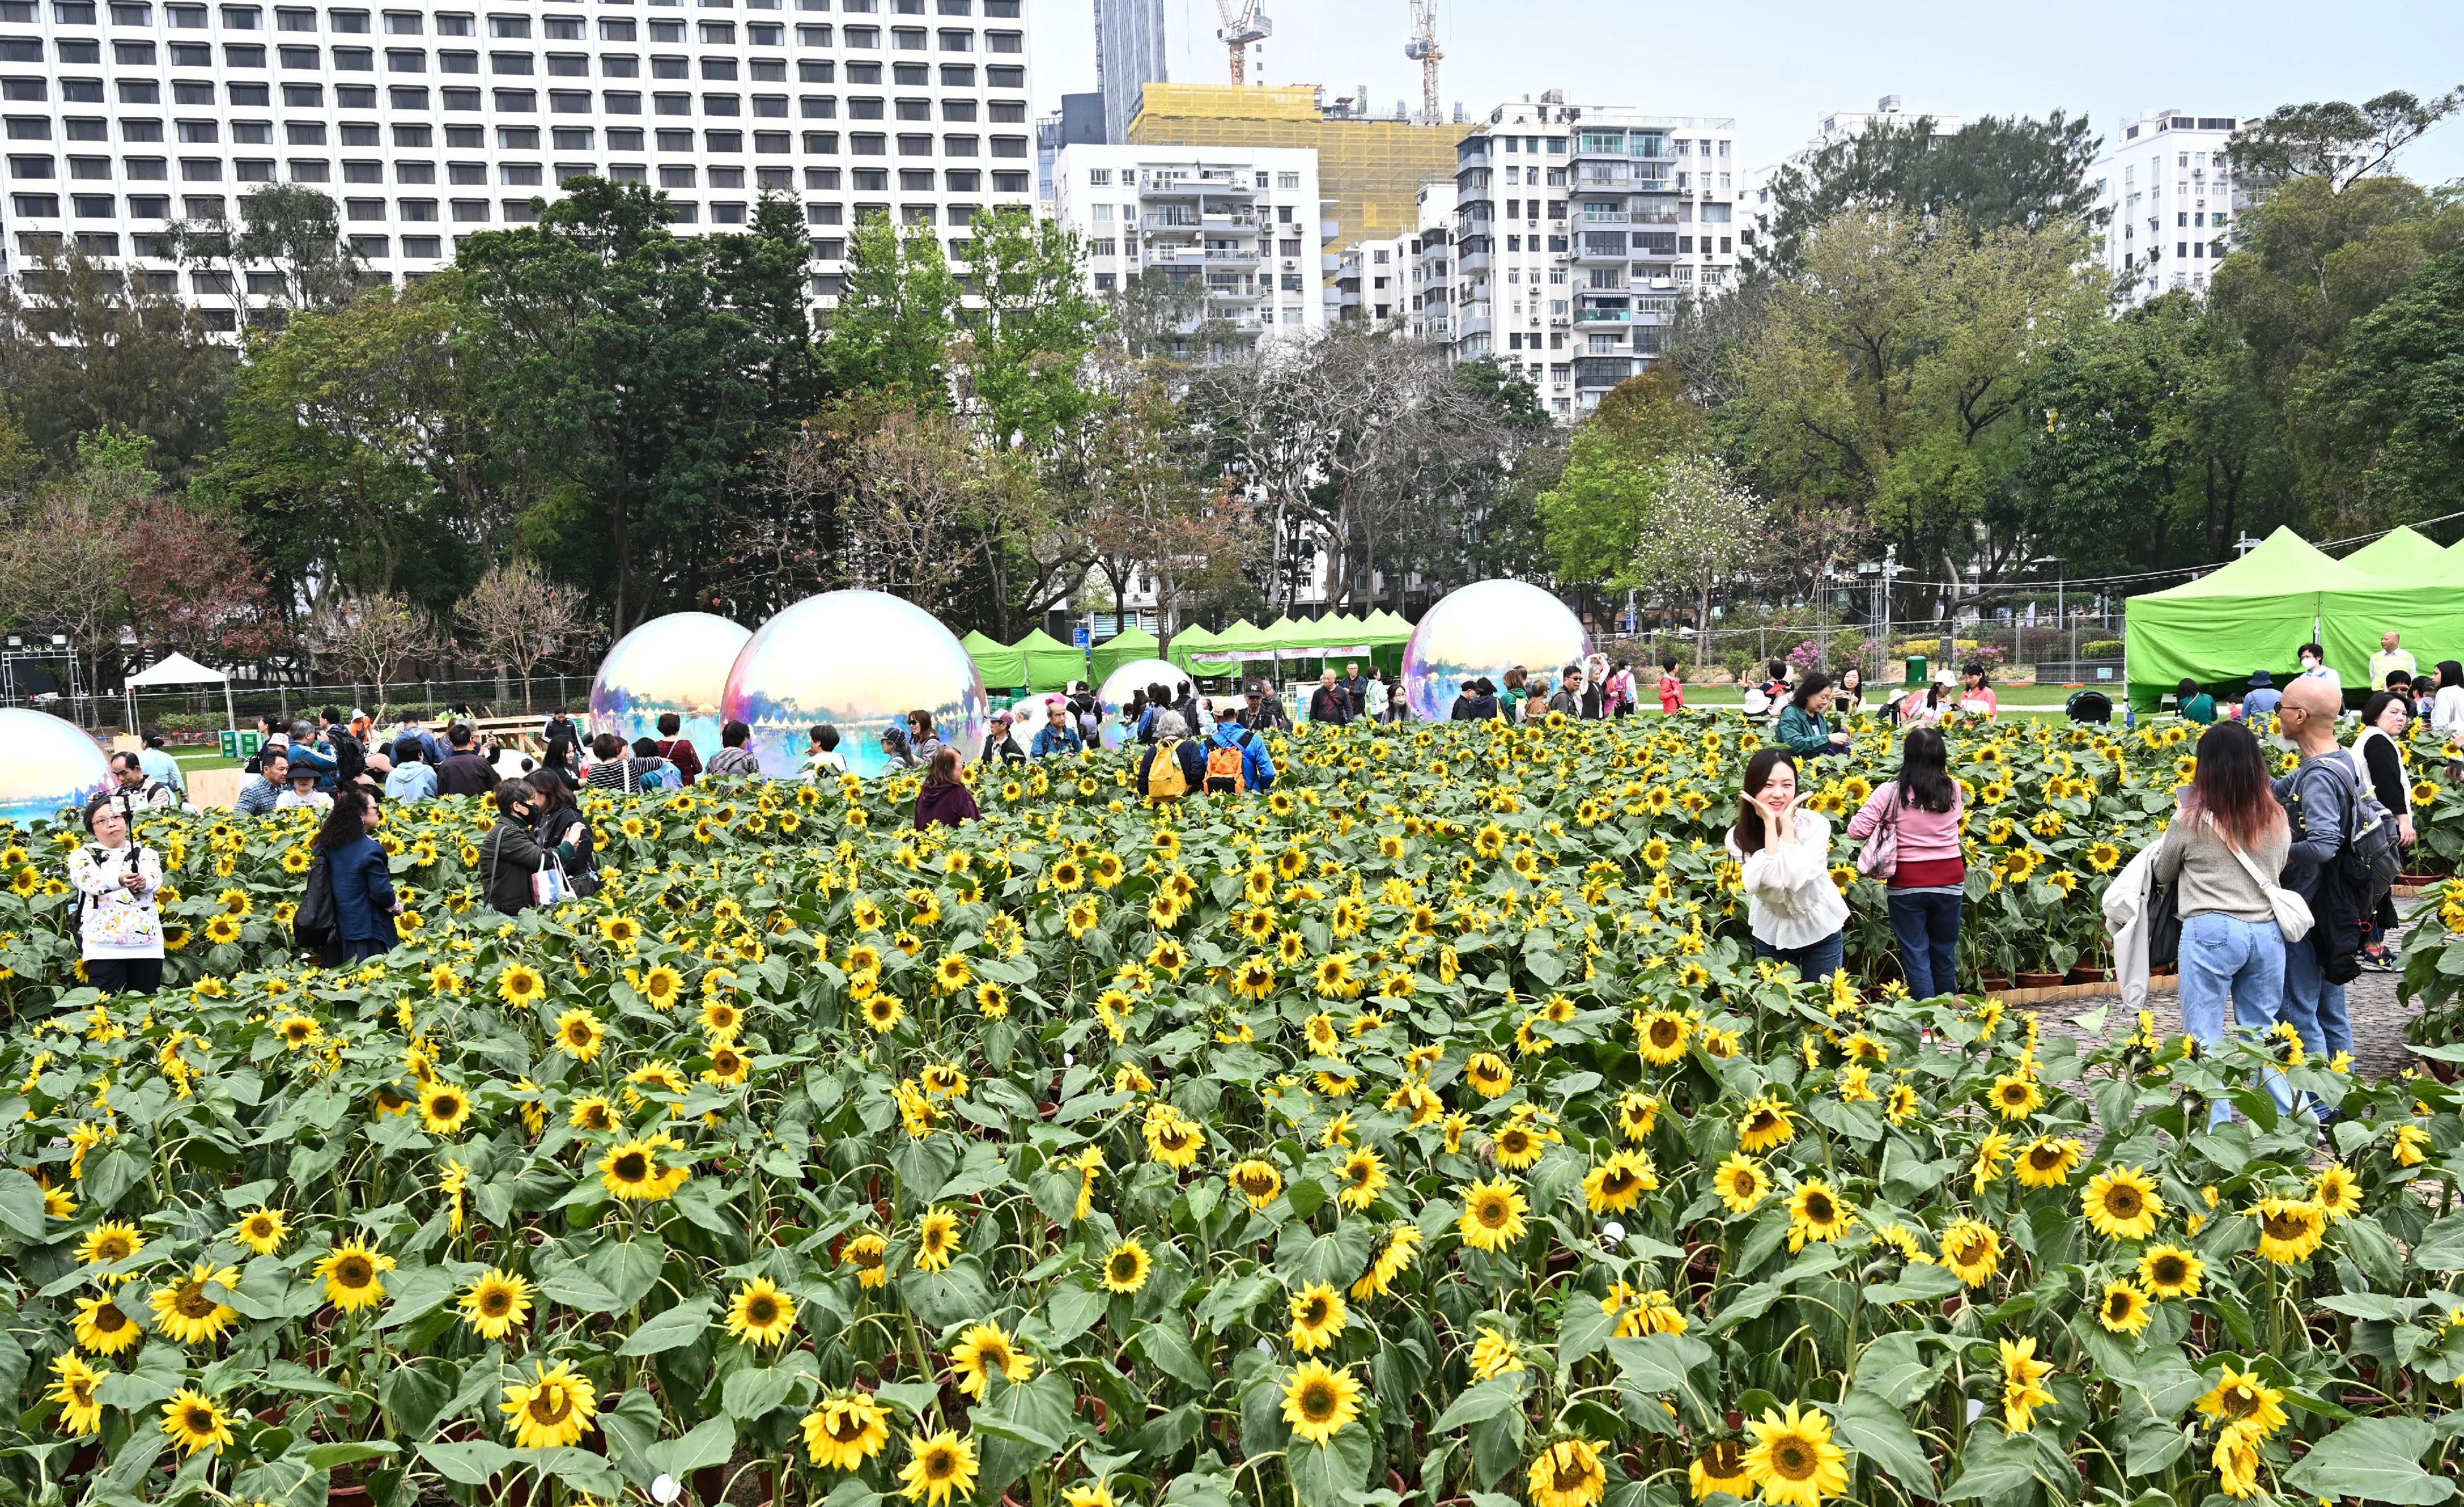 The annual Hong Kong Flower Show extravaganza opened at Victoria Park today (March 15) with some 420 000 flowers on display, including about 40 000 angelonias as the theme flower. The sunflower field carpeted with over 5 000 sunflowers became a popular photo spot.
